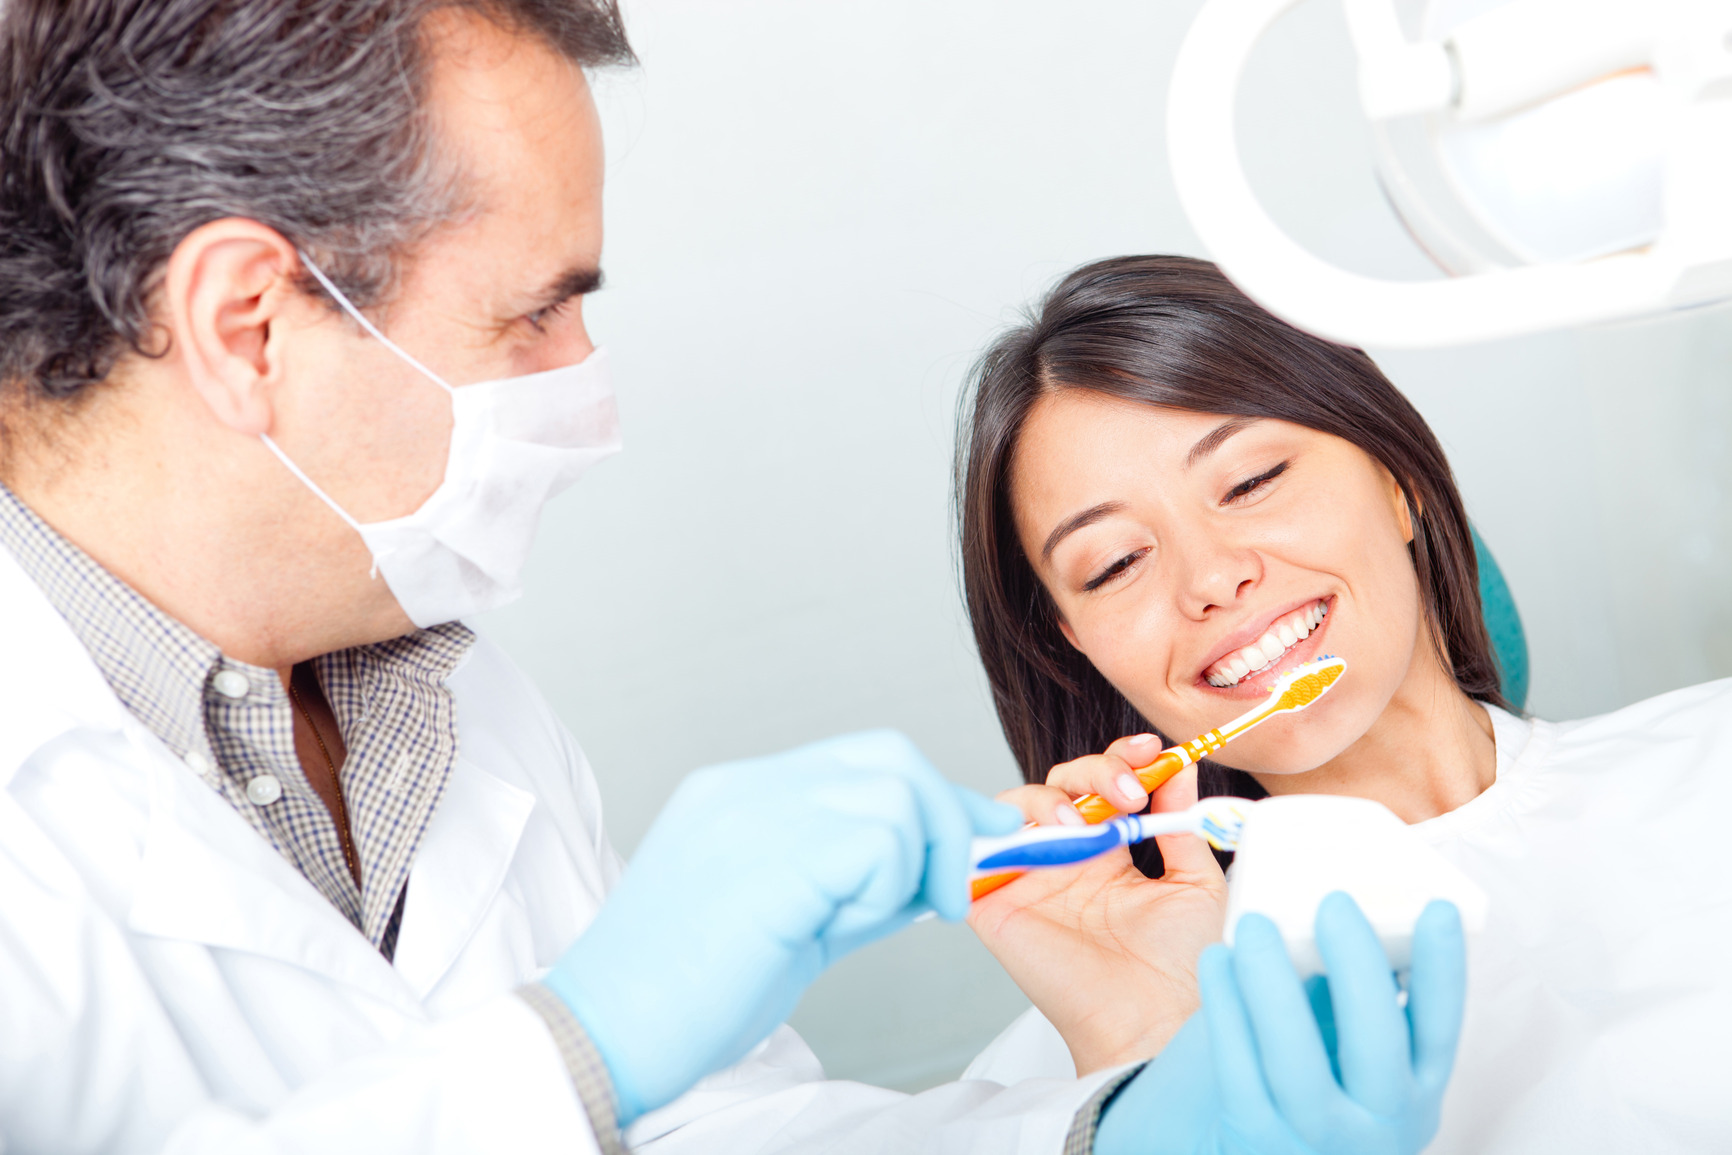 Dental Implant The Complete Treatment Plan